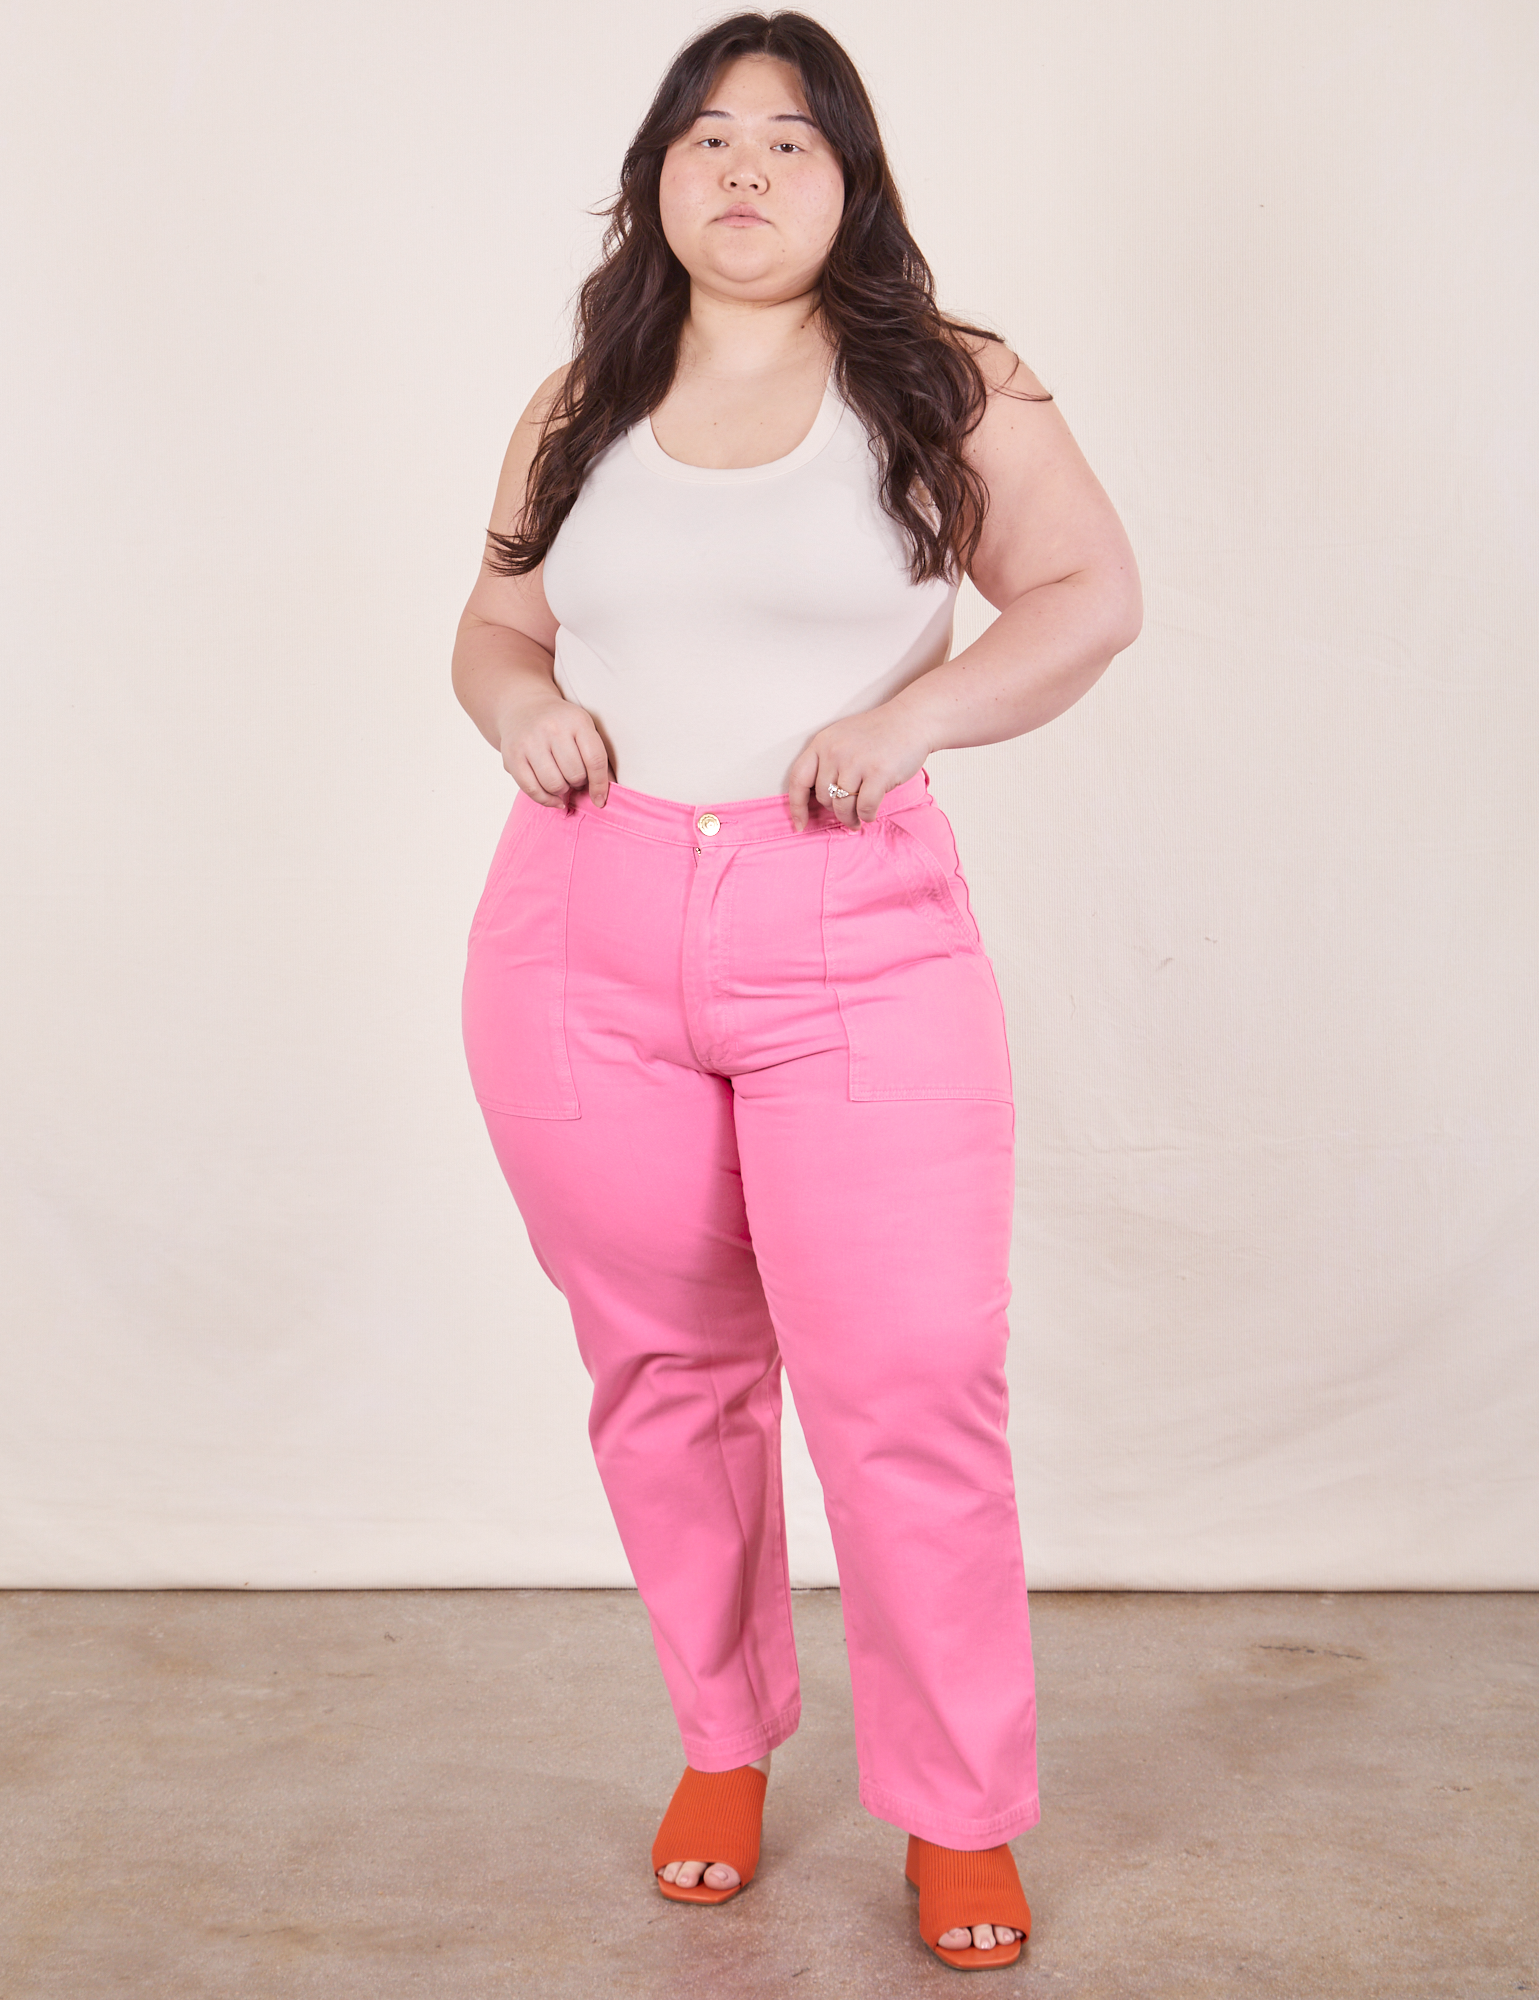 Ashley is 5&#39;7&quot; and wearing 1XL Work Pants in Bubblegum Pink paired with vintage off-white Tank Top